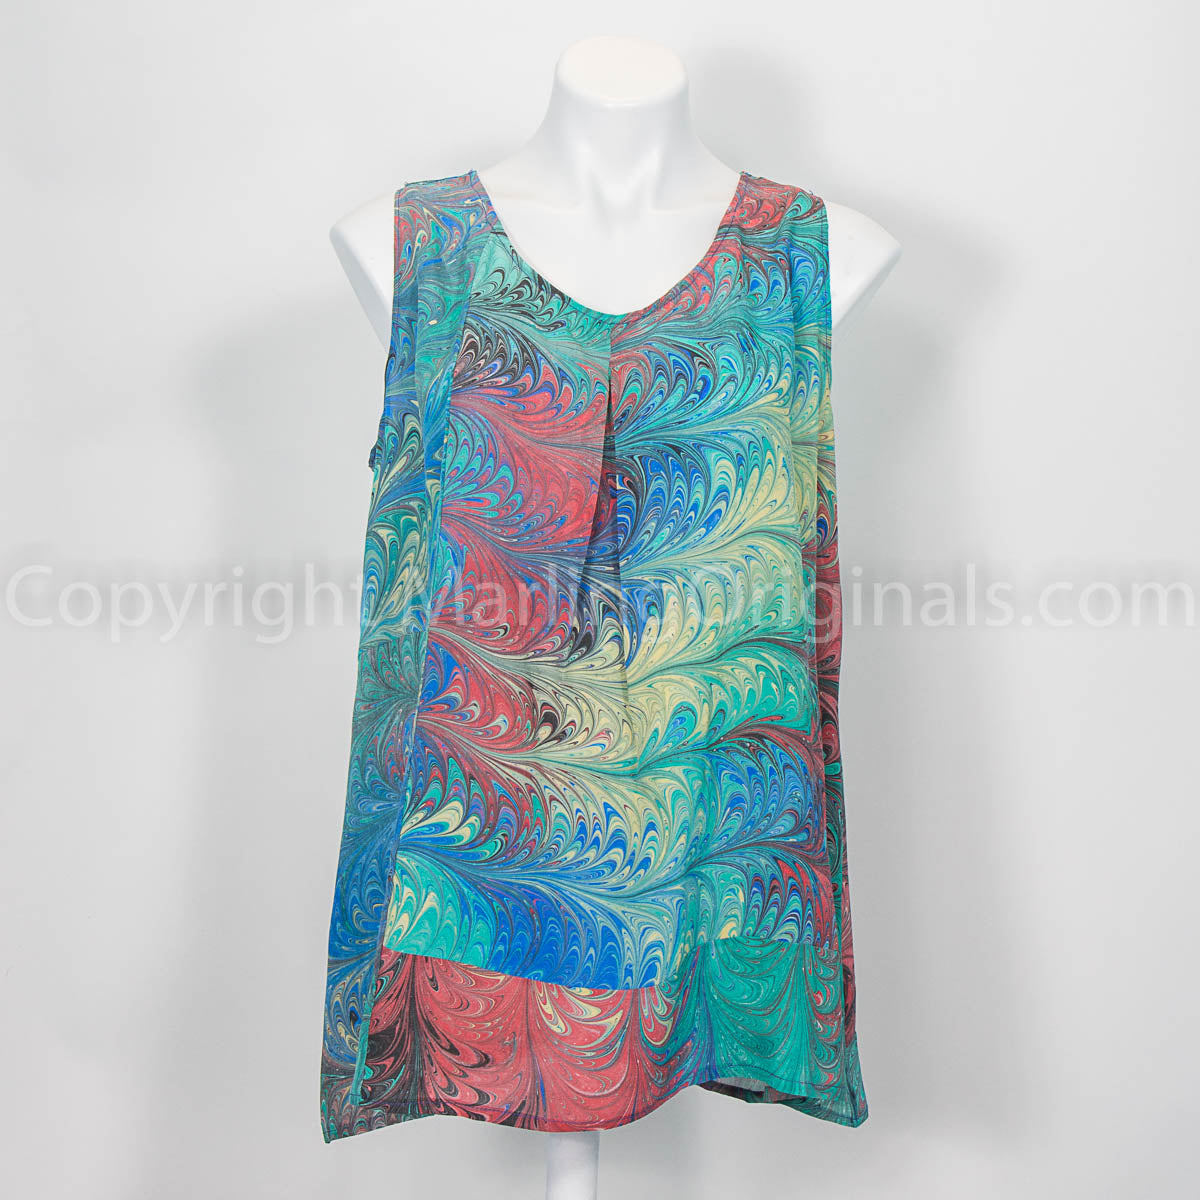 crepe silk tank top pieced with marbled fabric in shades of blue, green, red and yellow